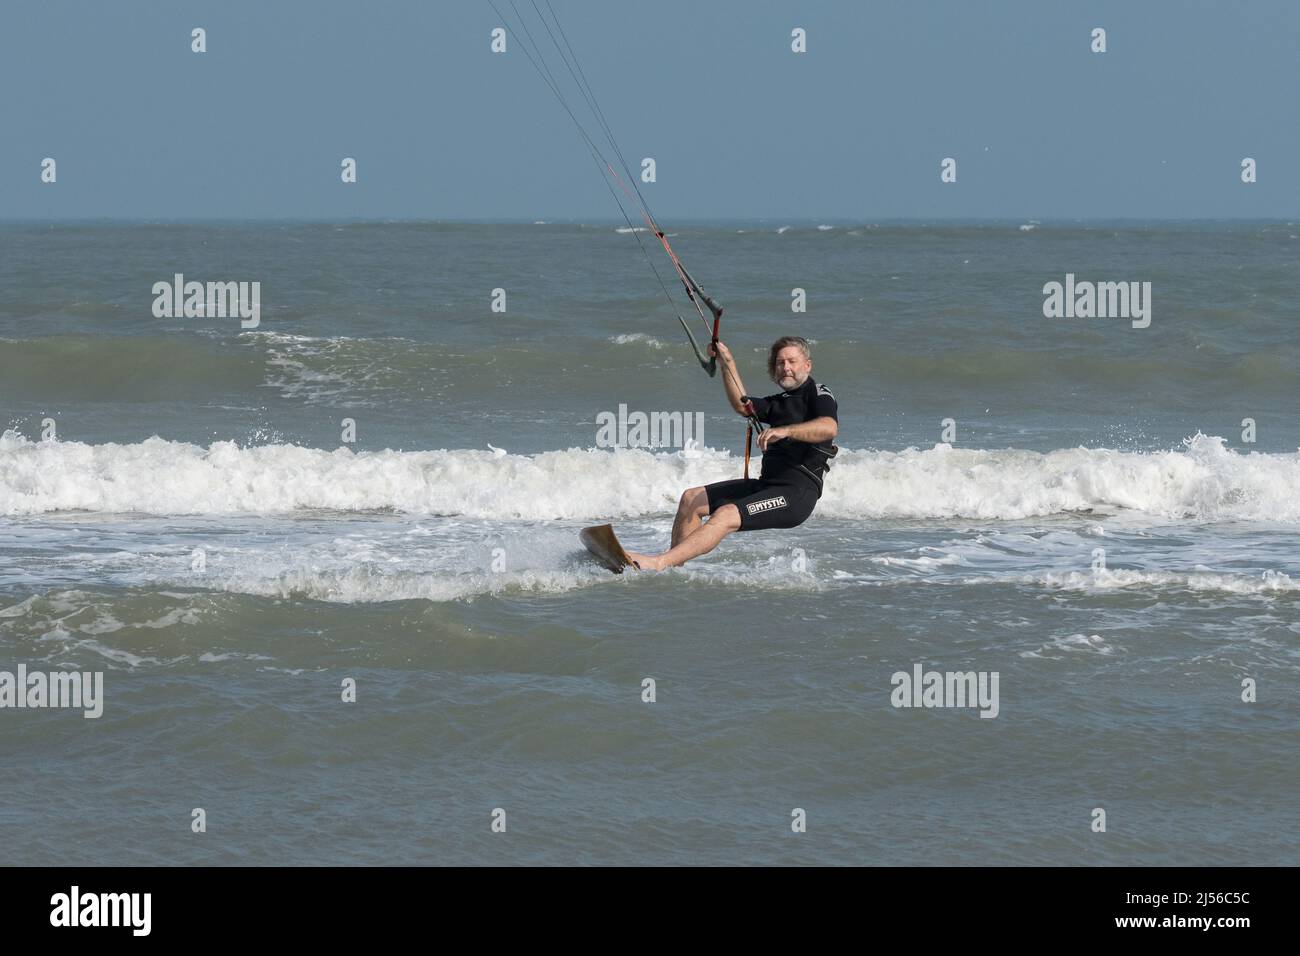 A kite surfer on a wooden surfboard cuts through the surf while kiting in the Gulf of Mexico at South Padre Island, Texas. Stock Photo